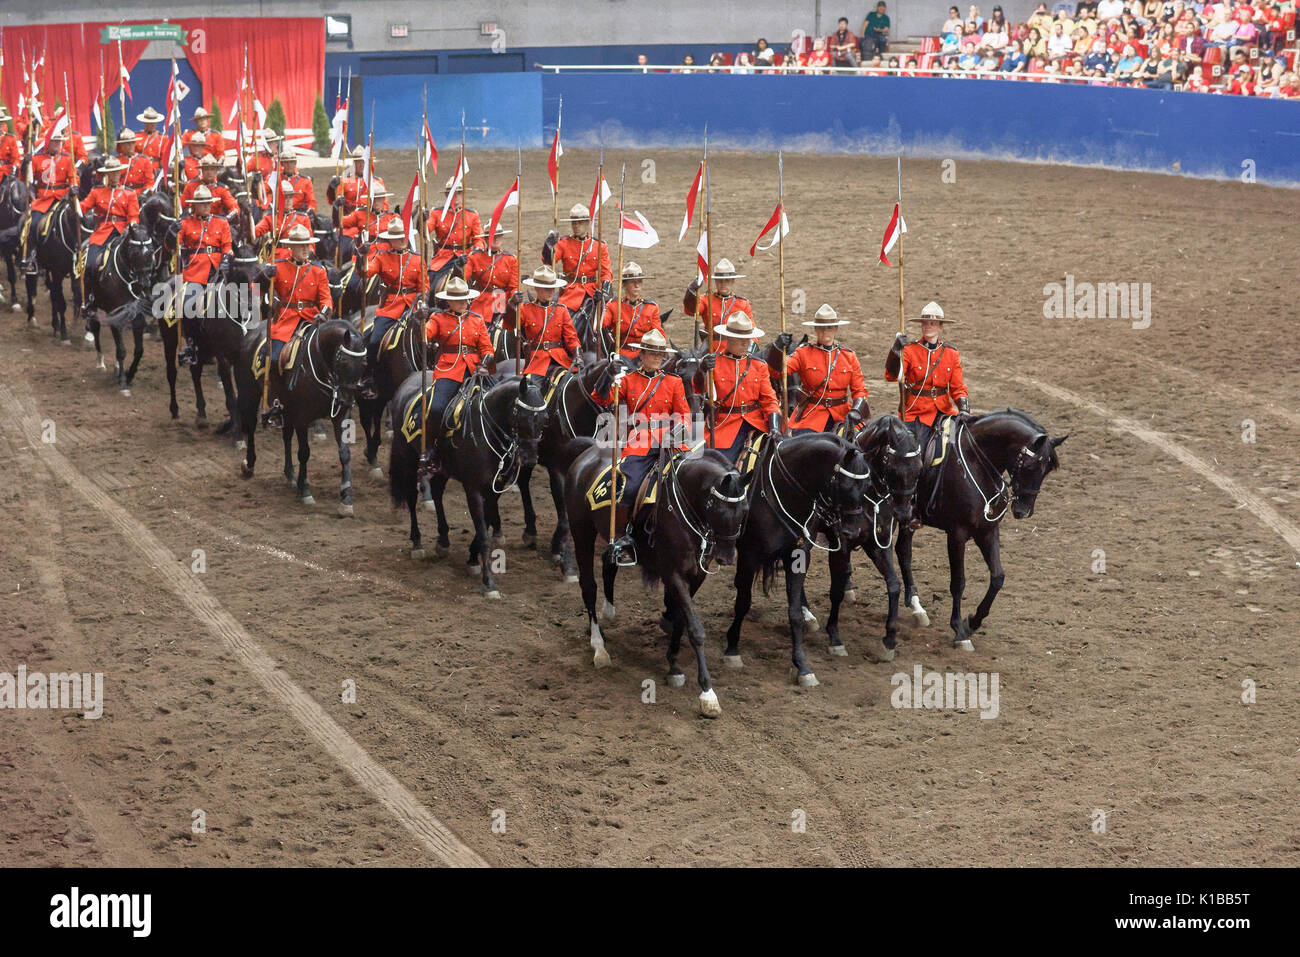 RCMP Musical Ride performance, Vancouver, British Columbia, Canada. Stock Photo